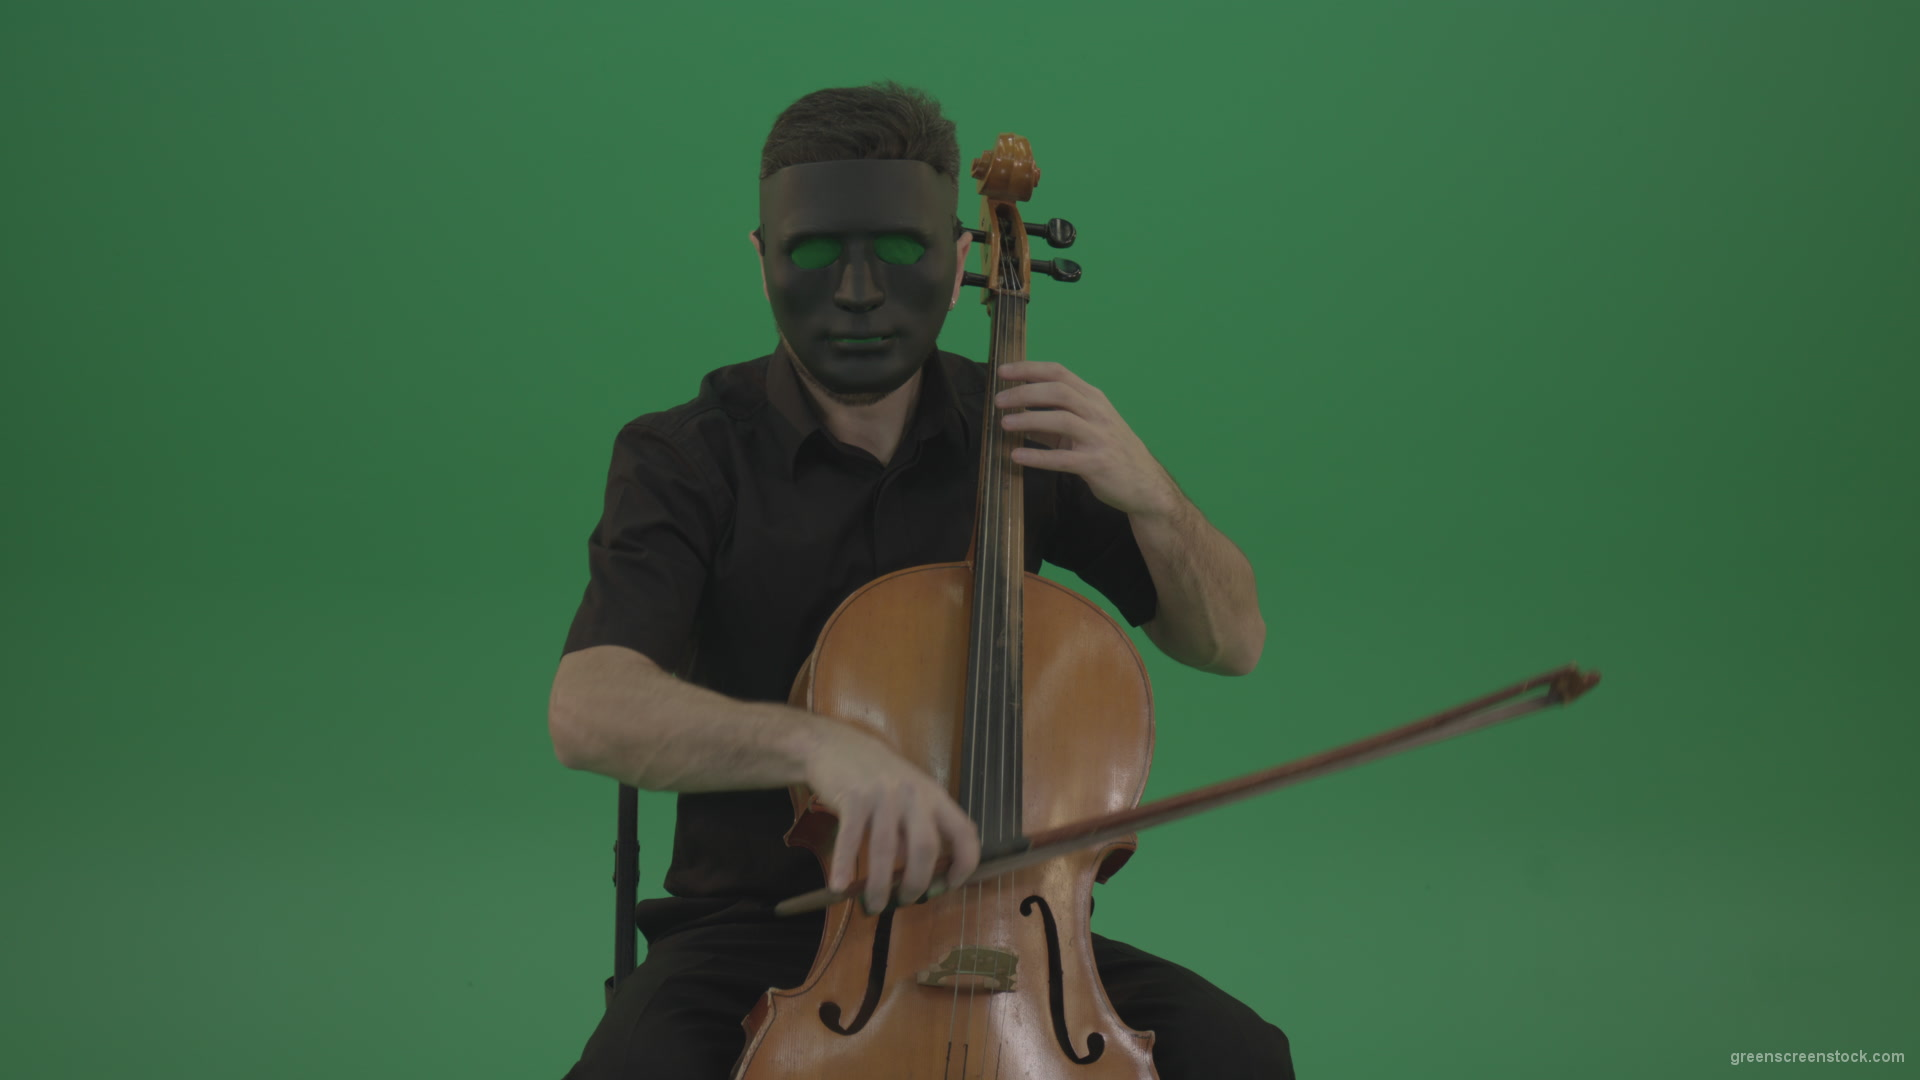 Gothic-Man-in-black-mask-playing-violoncello-cello-strings-music-instrument-isolated-on-green-screen_002 Green Screen Stock